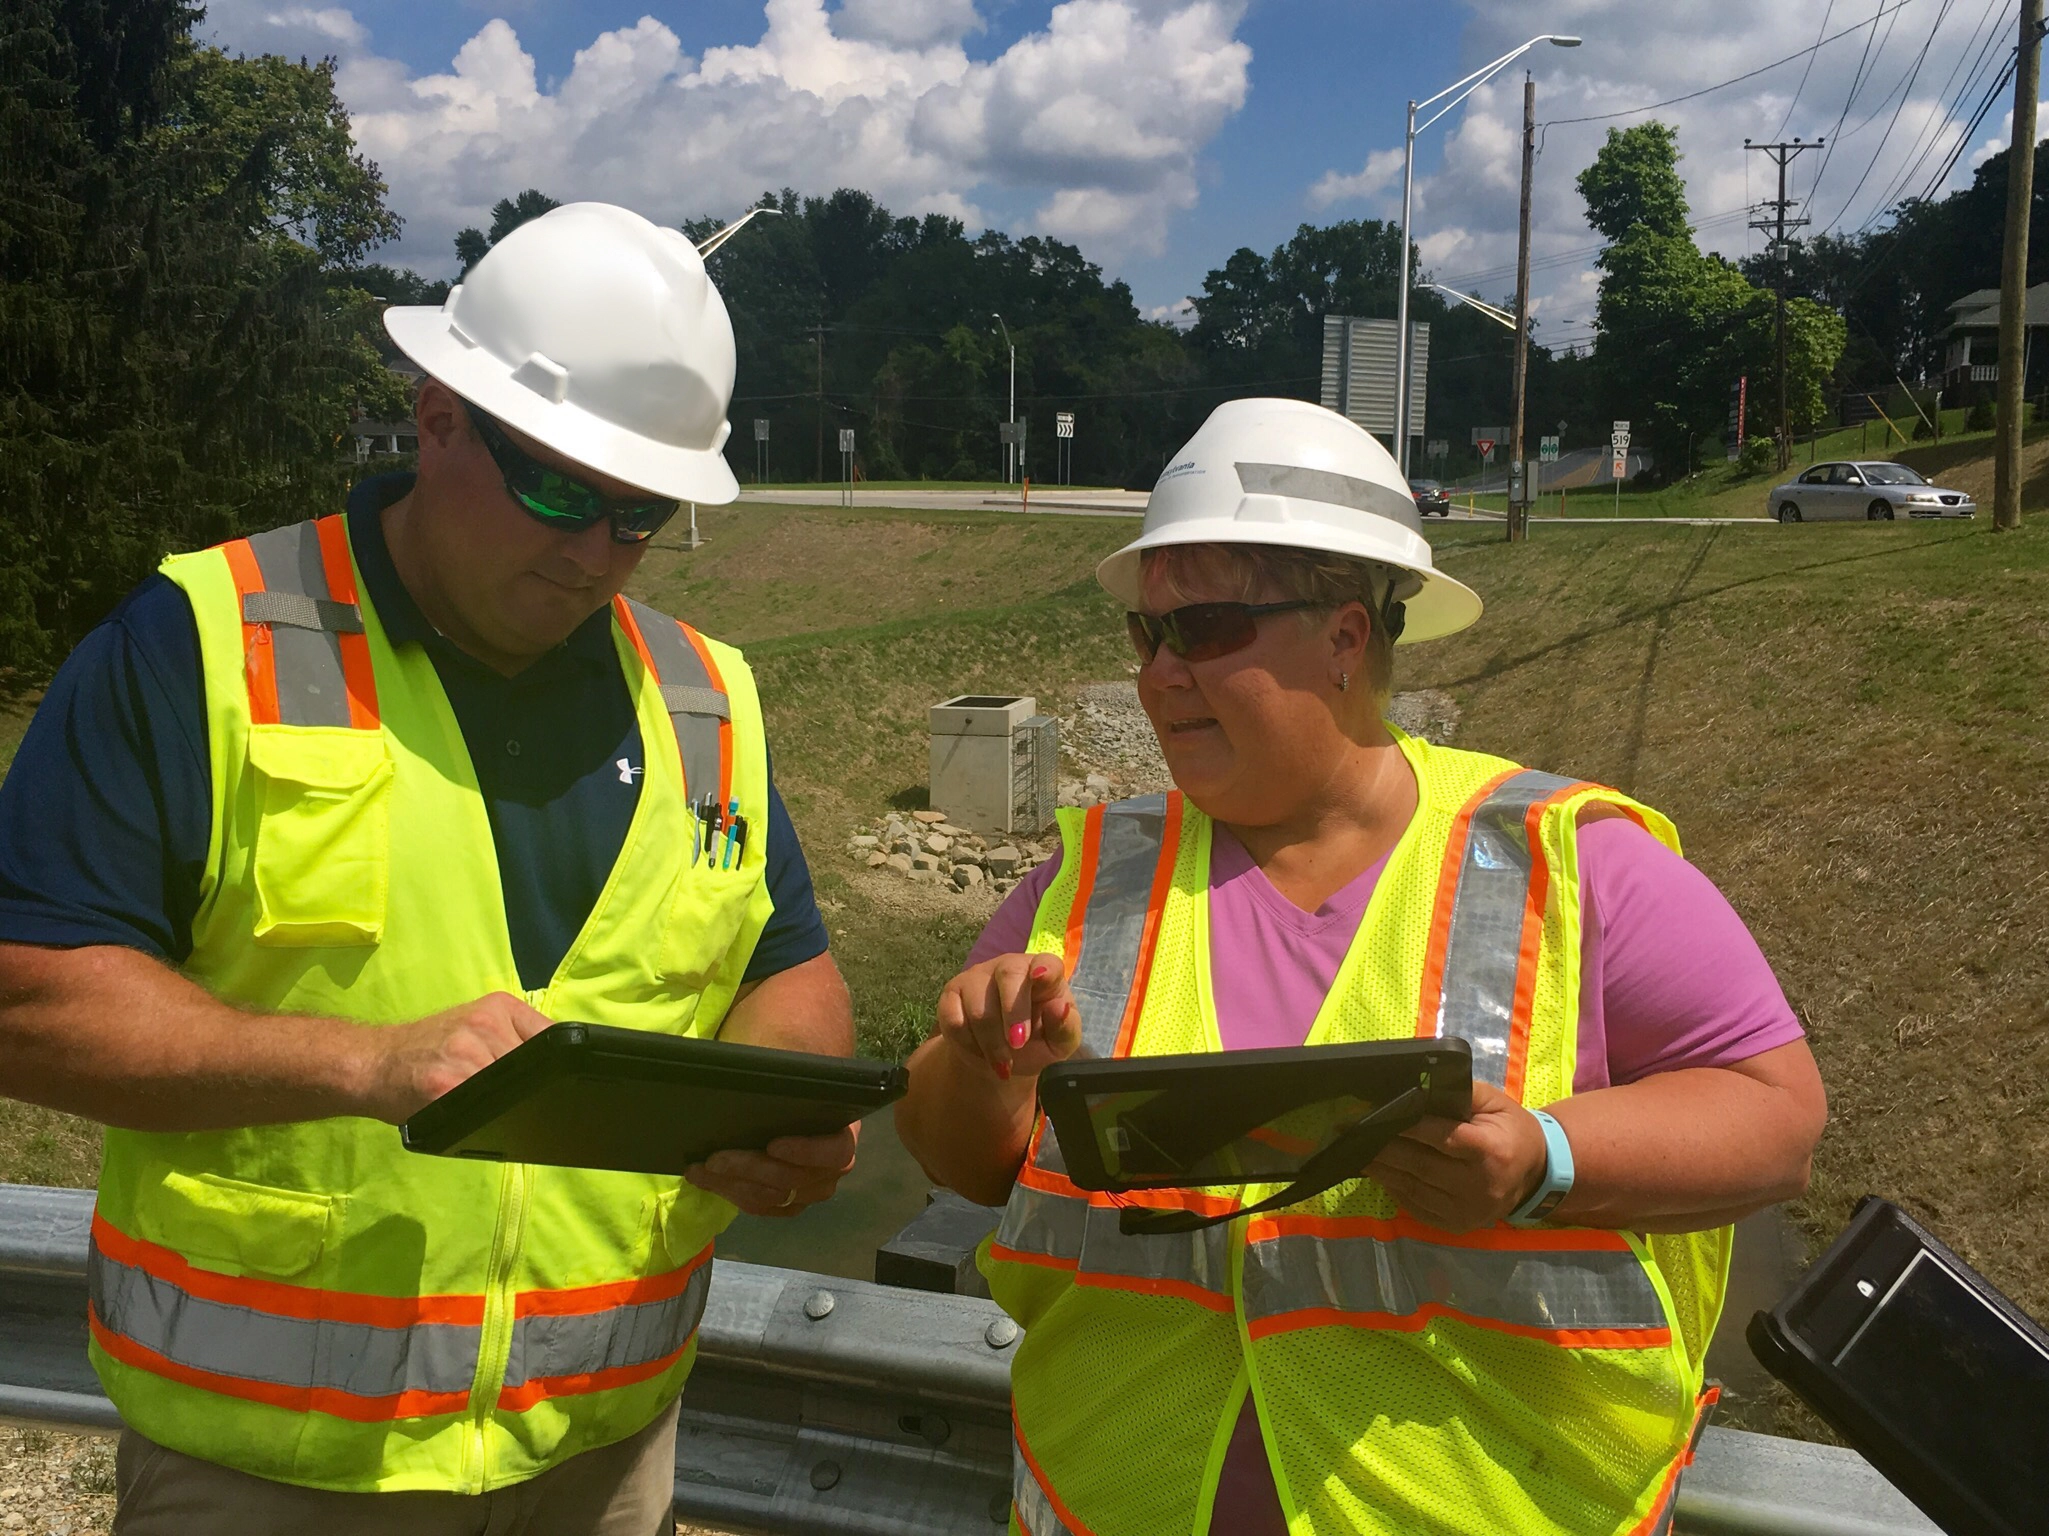 An image of two workers in white hard hats and yellow safety vests standing next to each other at a job site, talking and entering information about a construction projects onto their mobile devices